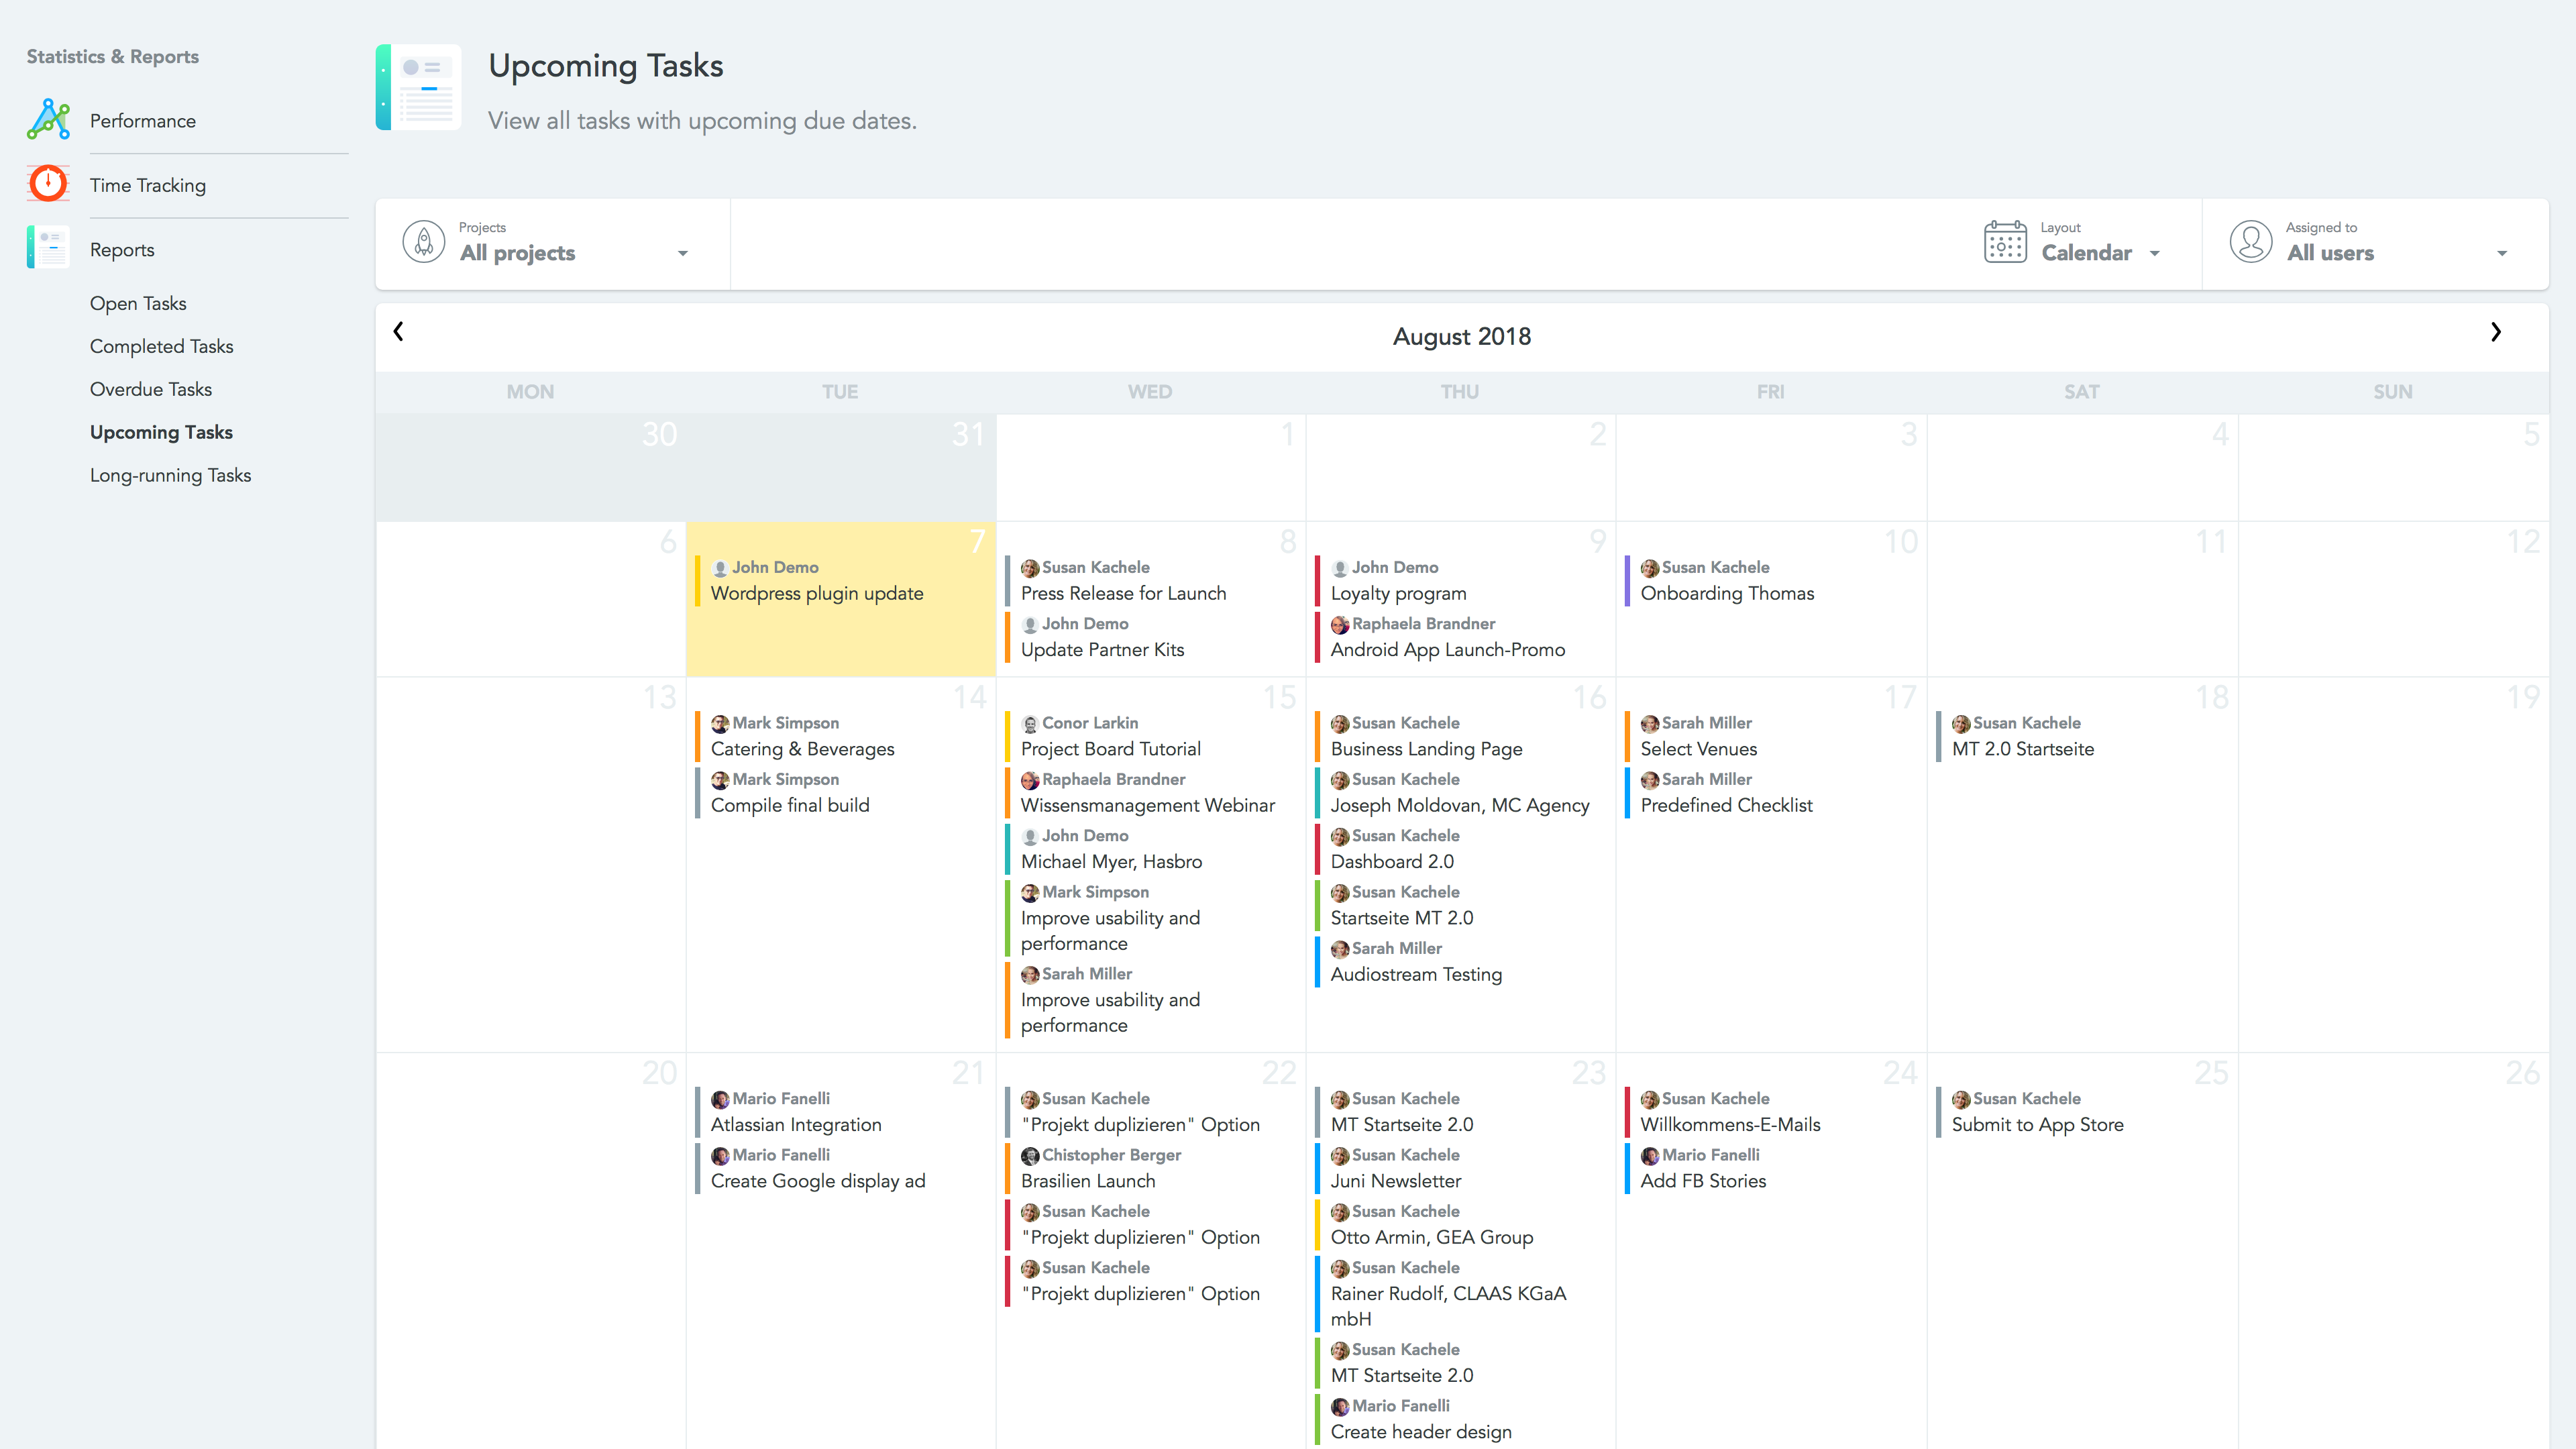 View upcoming team tasks in calendar view